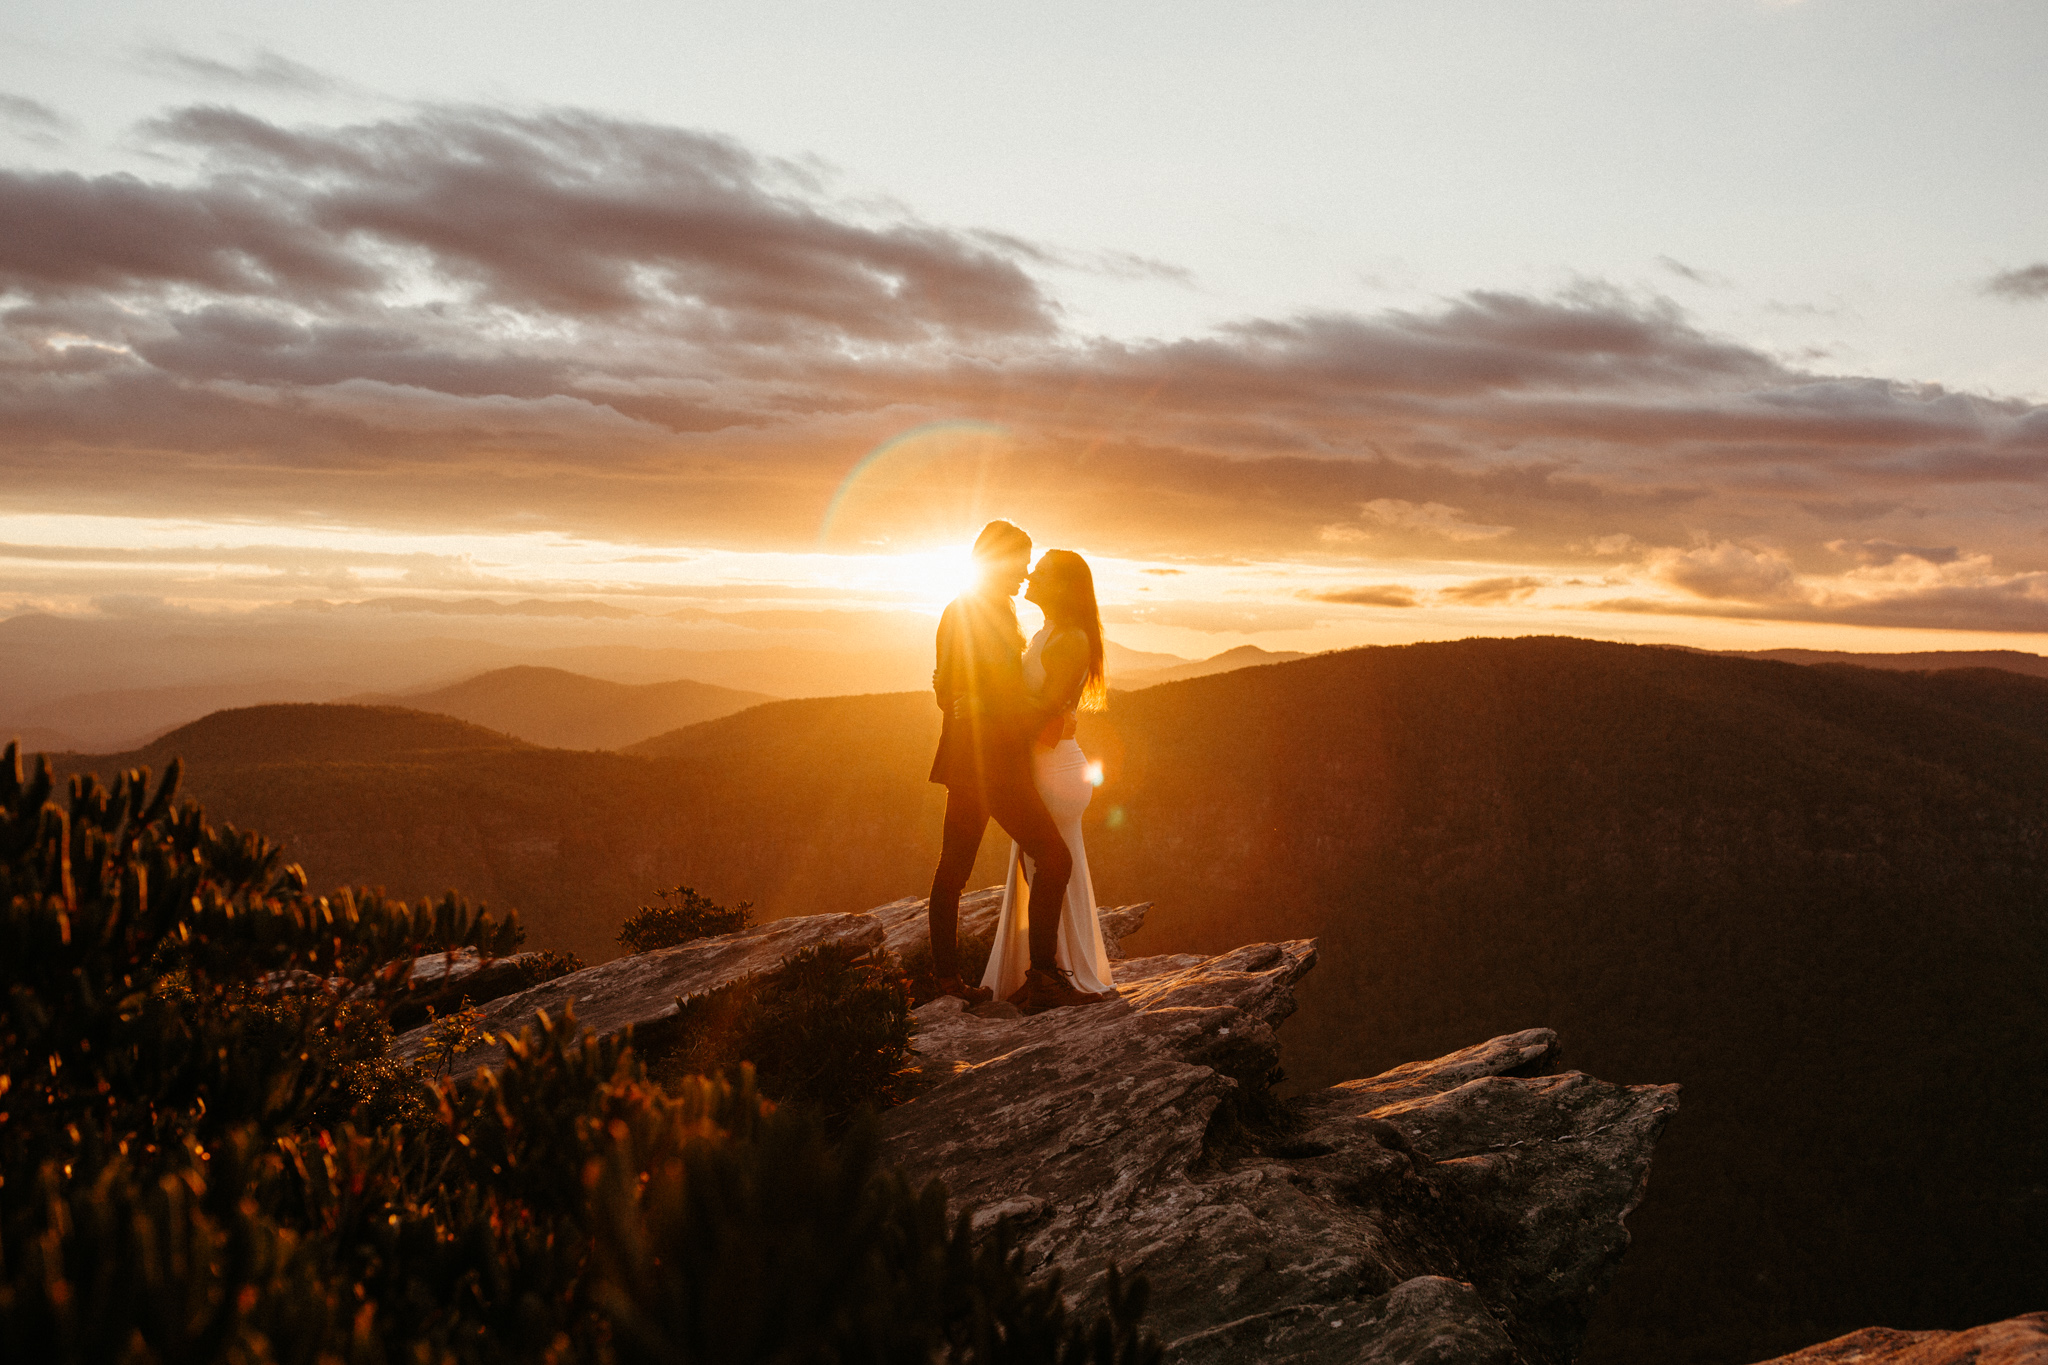 Adventurous Sunset Session At Hawksbill Mountain With Mouthwatering Vegan Donuts // Elopement Wedding Photographer Victoria Selman